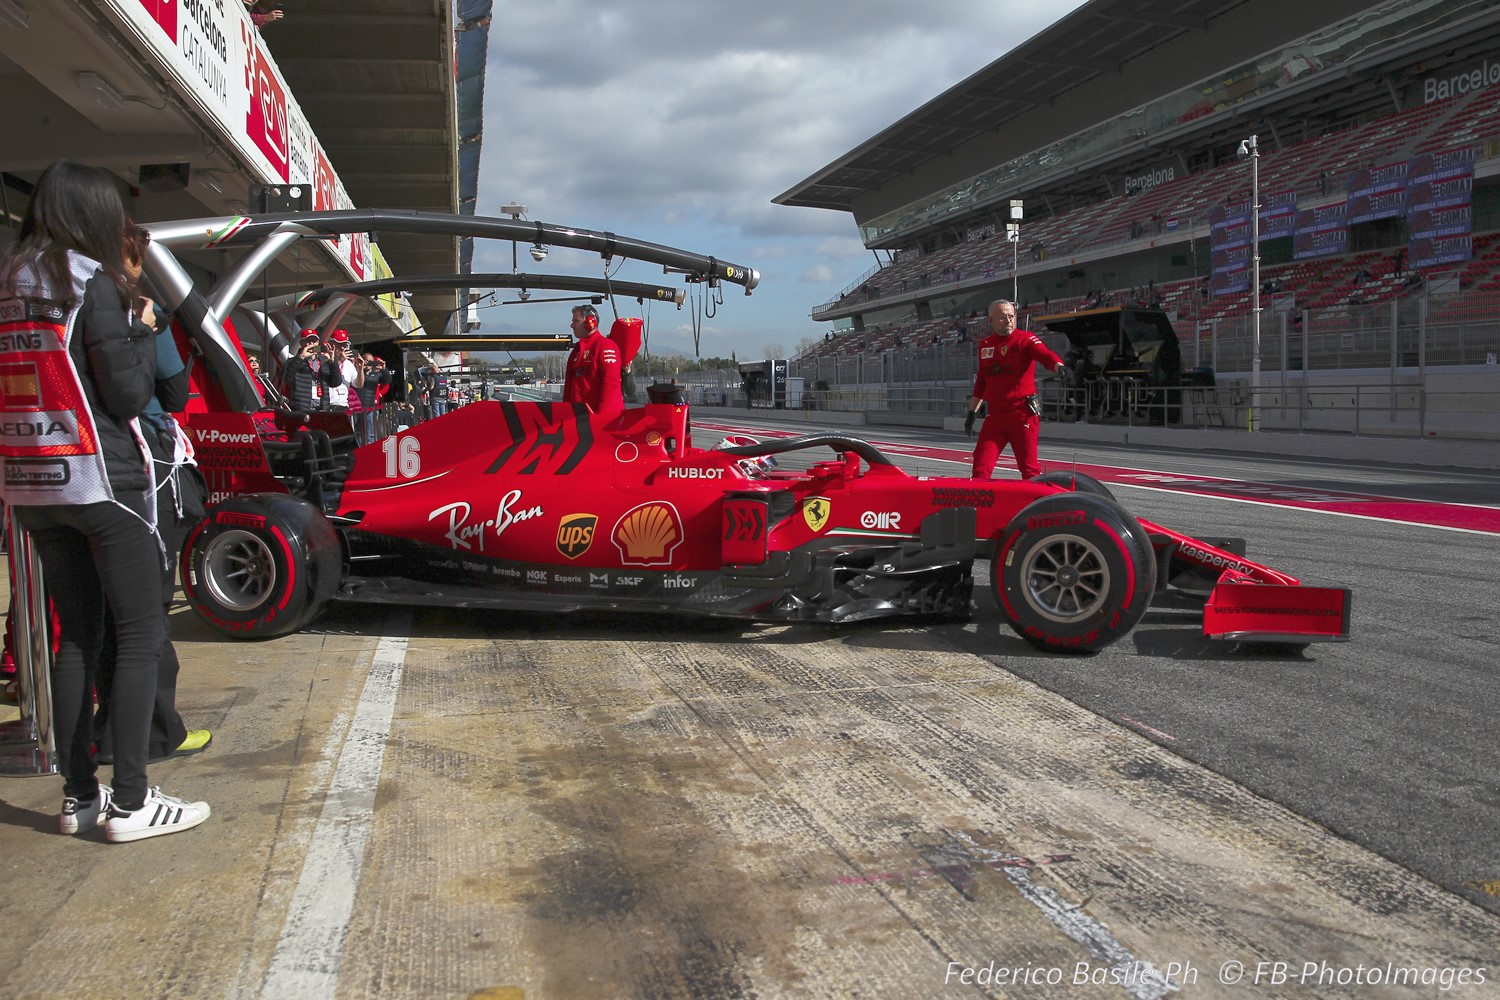 Unless they are sandbagging, Ferrari claims, and test times prove, Ferrari are down on power this year